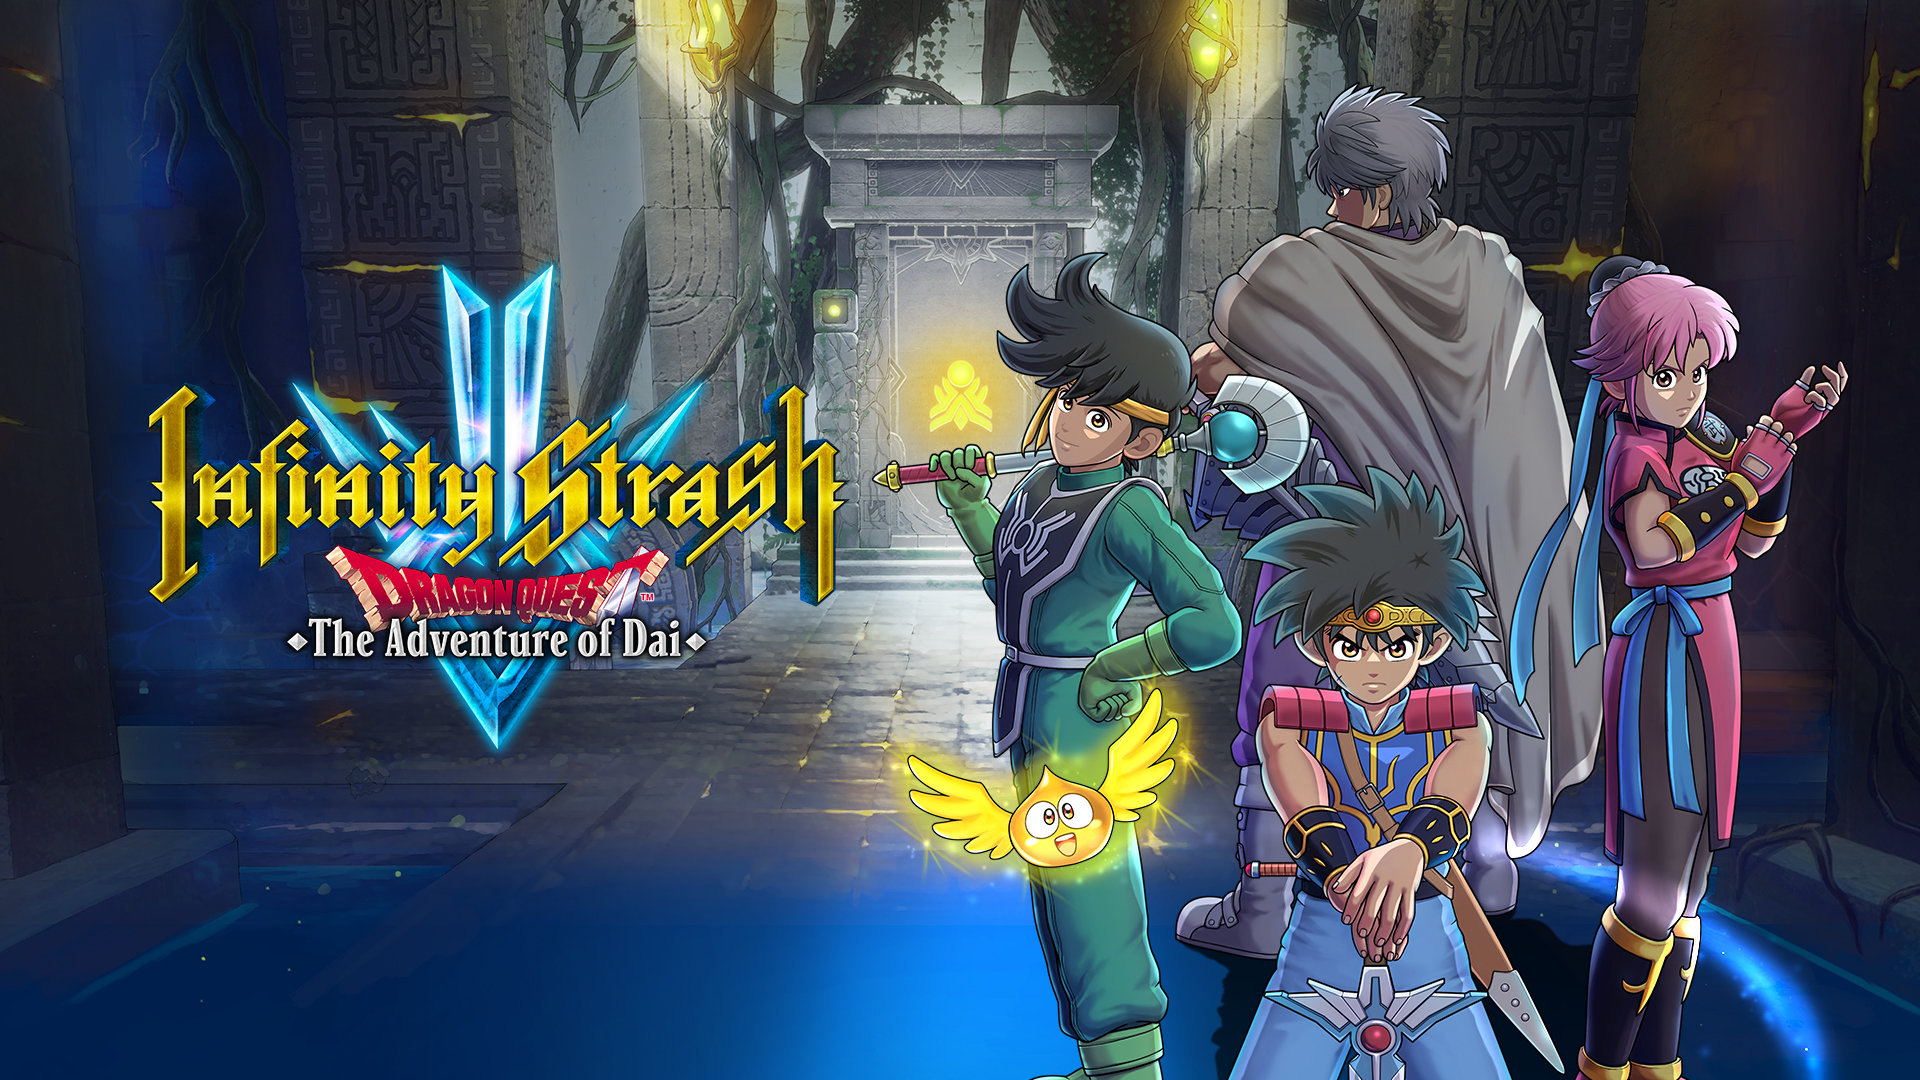 INFINITY STRASH: DRAGON QUEST THE ADVENTURE OF DAI LAUNCHES WORLDWIDE ON SEPTEMBER 28, 2023!